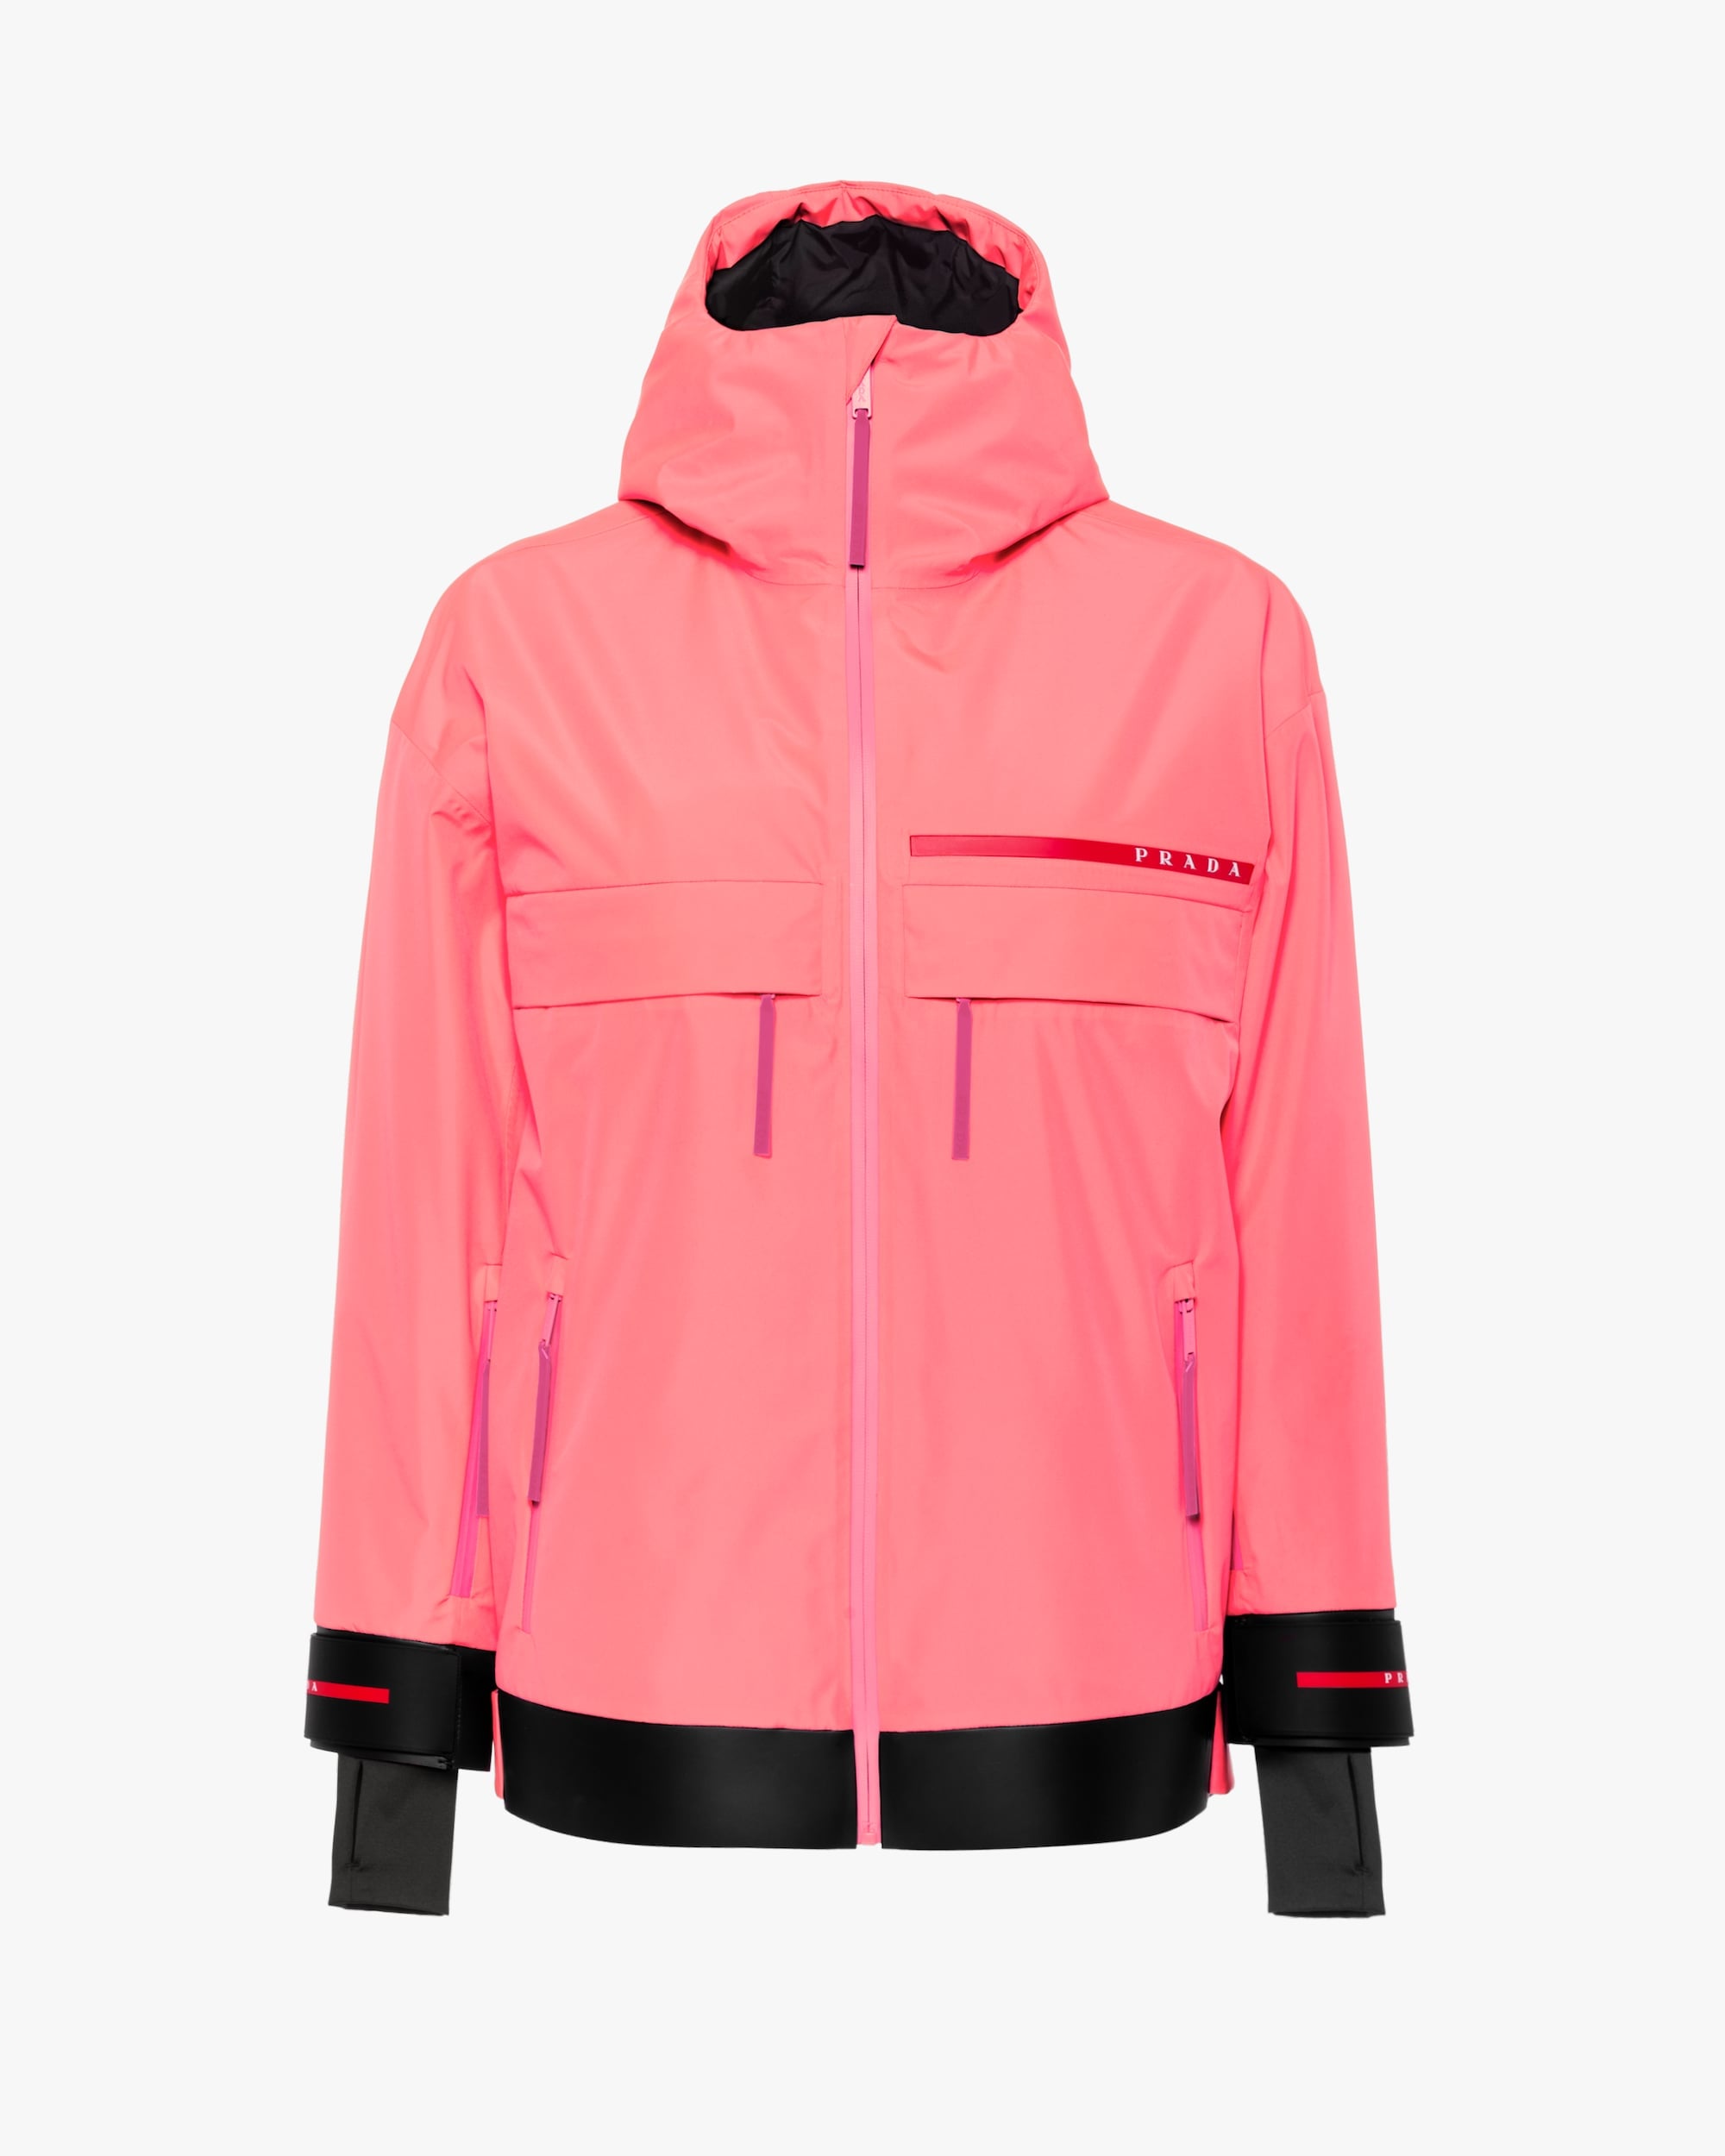 Prada Gore-Tex Snowboard Jacket in Fluo Pink | You Can Own Olympian Julia  Marino's Prada Snowboard For a Cool $3,600 | POPSUGAR Fitness Photo 3